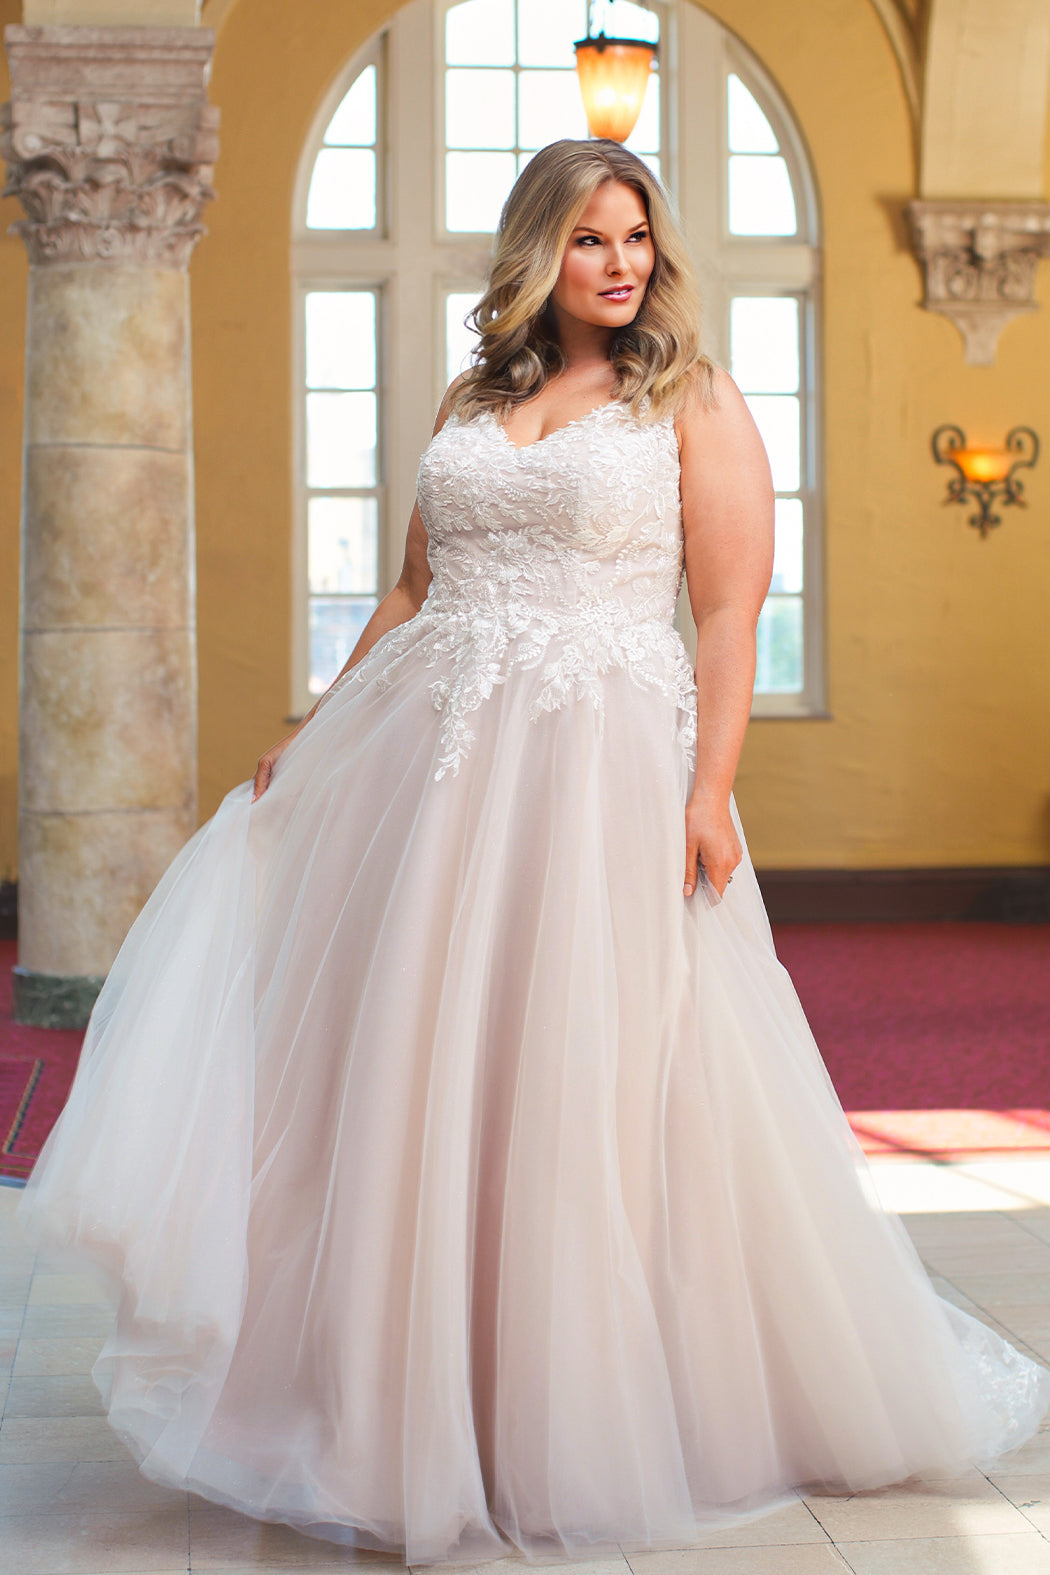 Breaking Stereotypes: Unconventional Plus Size Wedding Gown Ideas